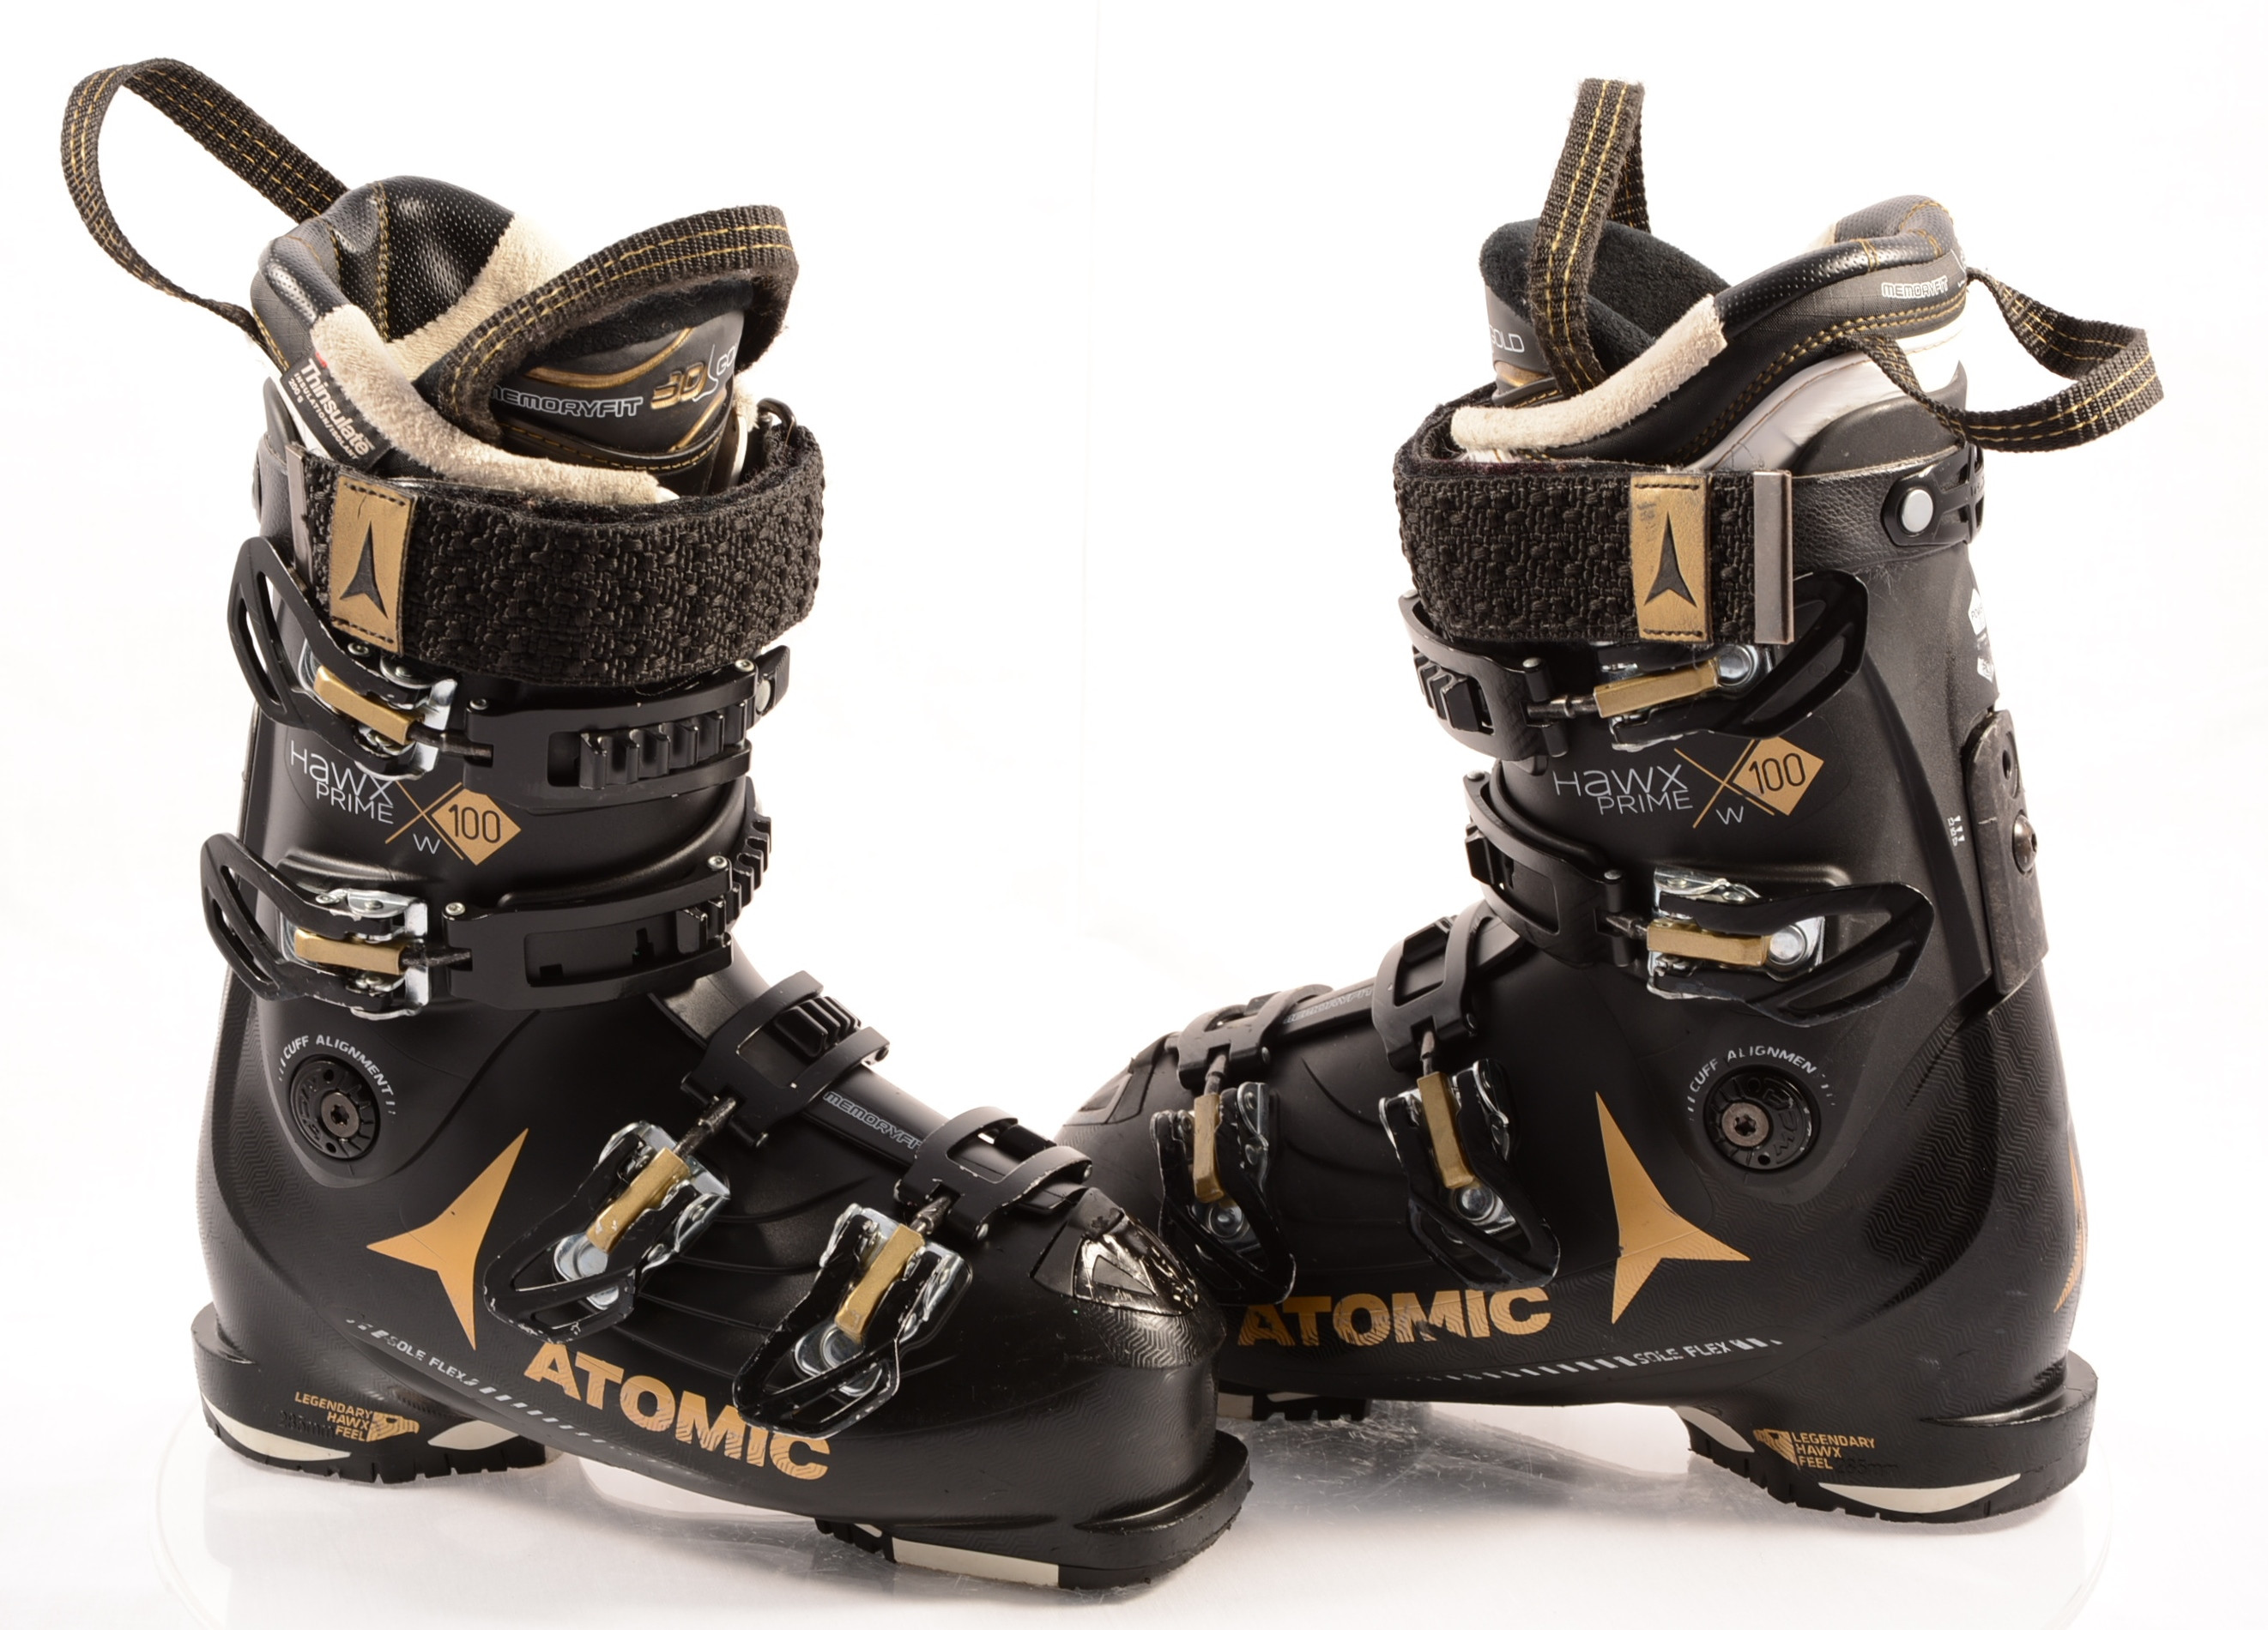 skischoenen ATOMIC HAWX PRIME W, THINSULATE, MEMORY FIT, 3D GOLD, SOLE FLEX, canting ( TOP staat ) - Mardosport.nl